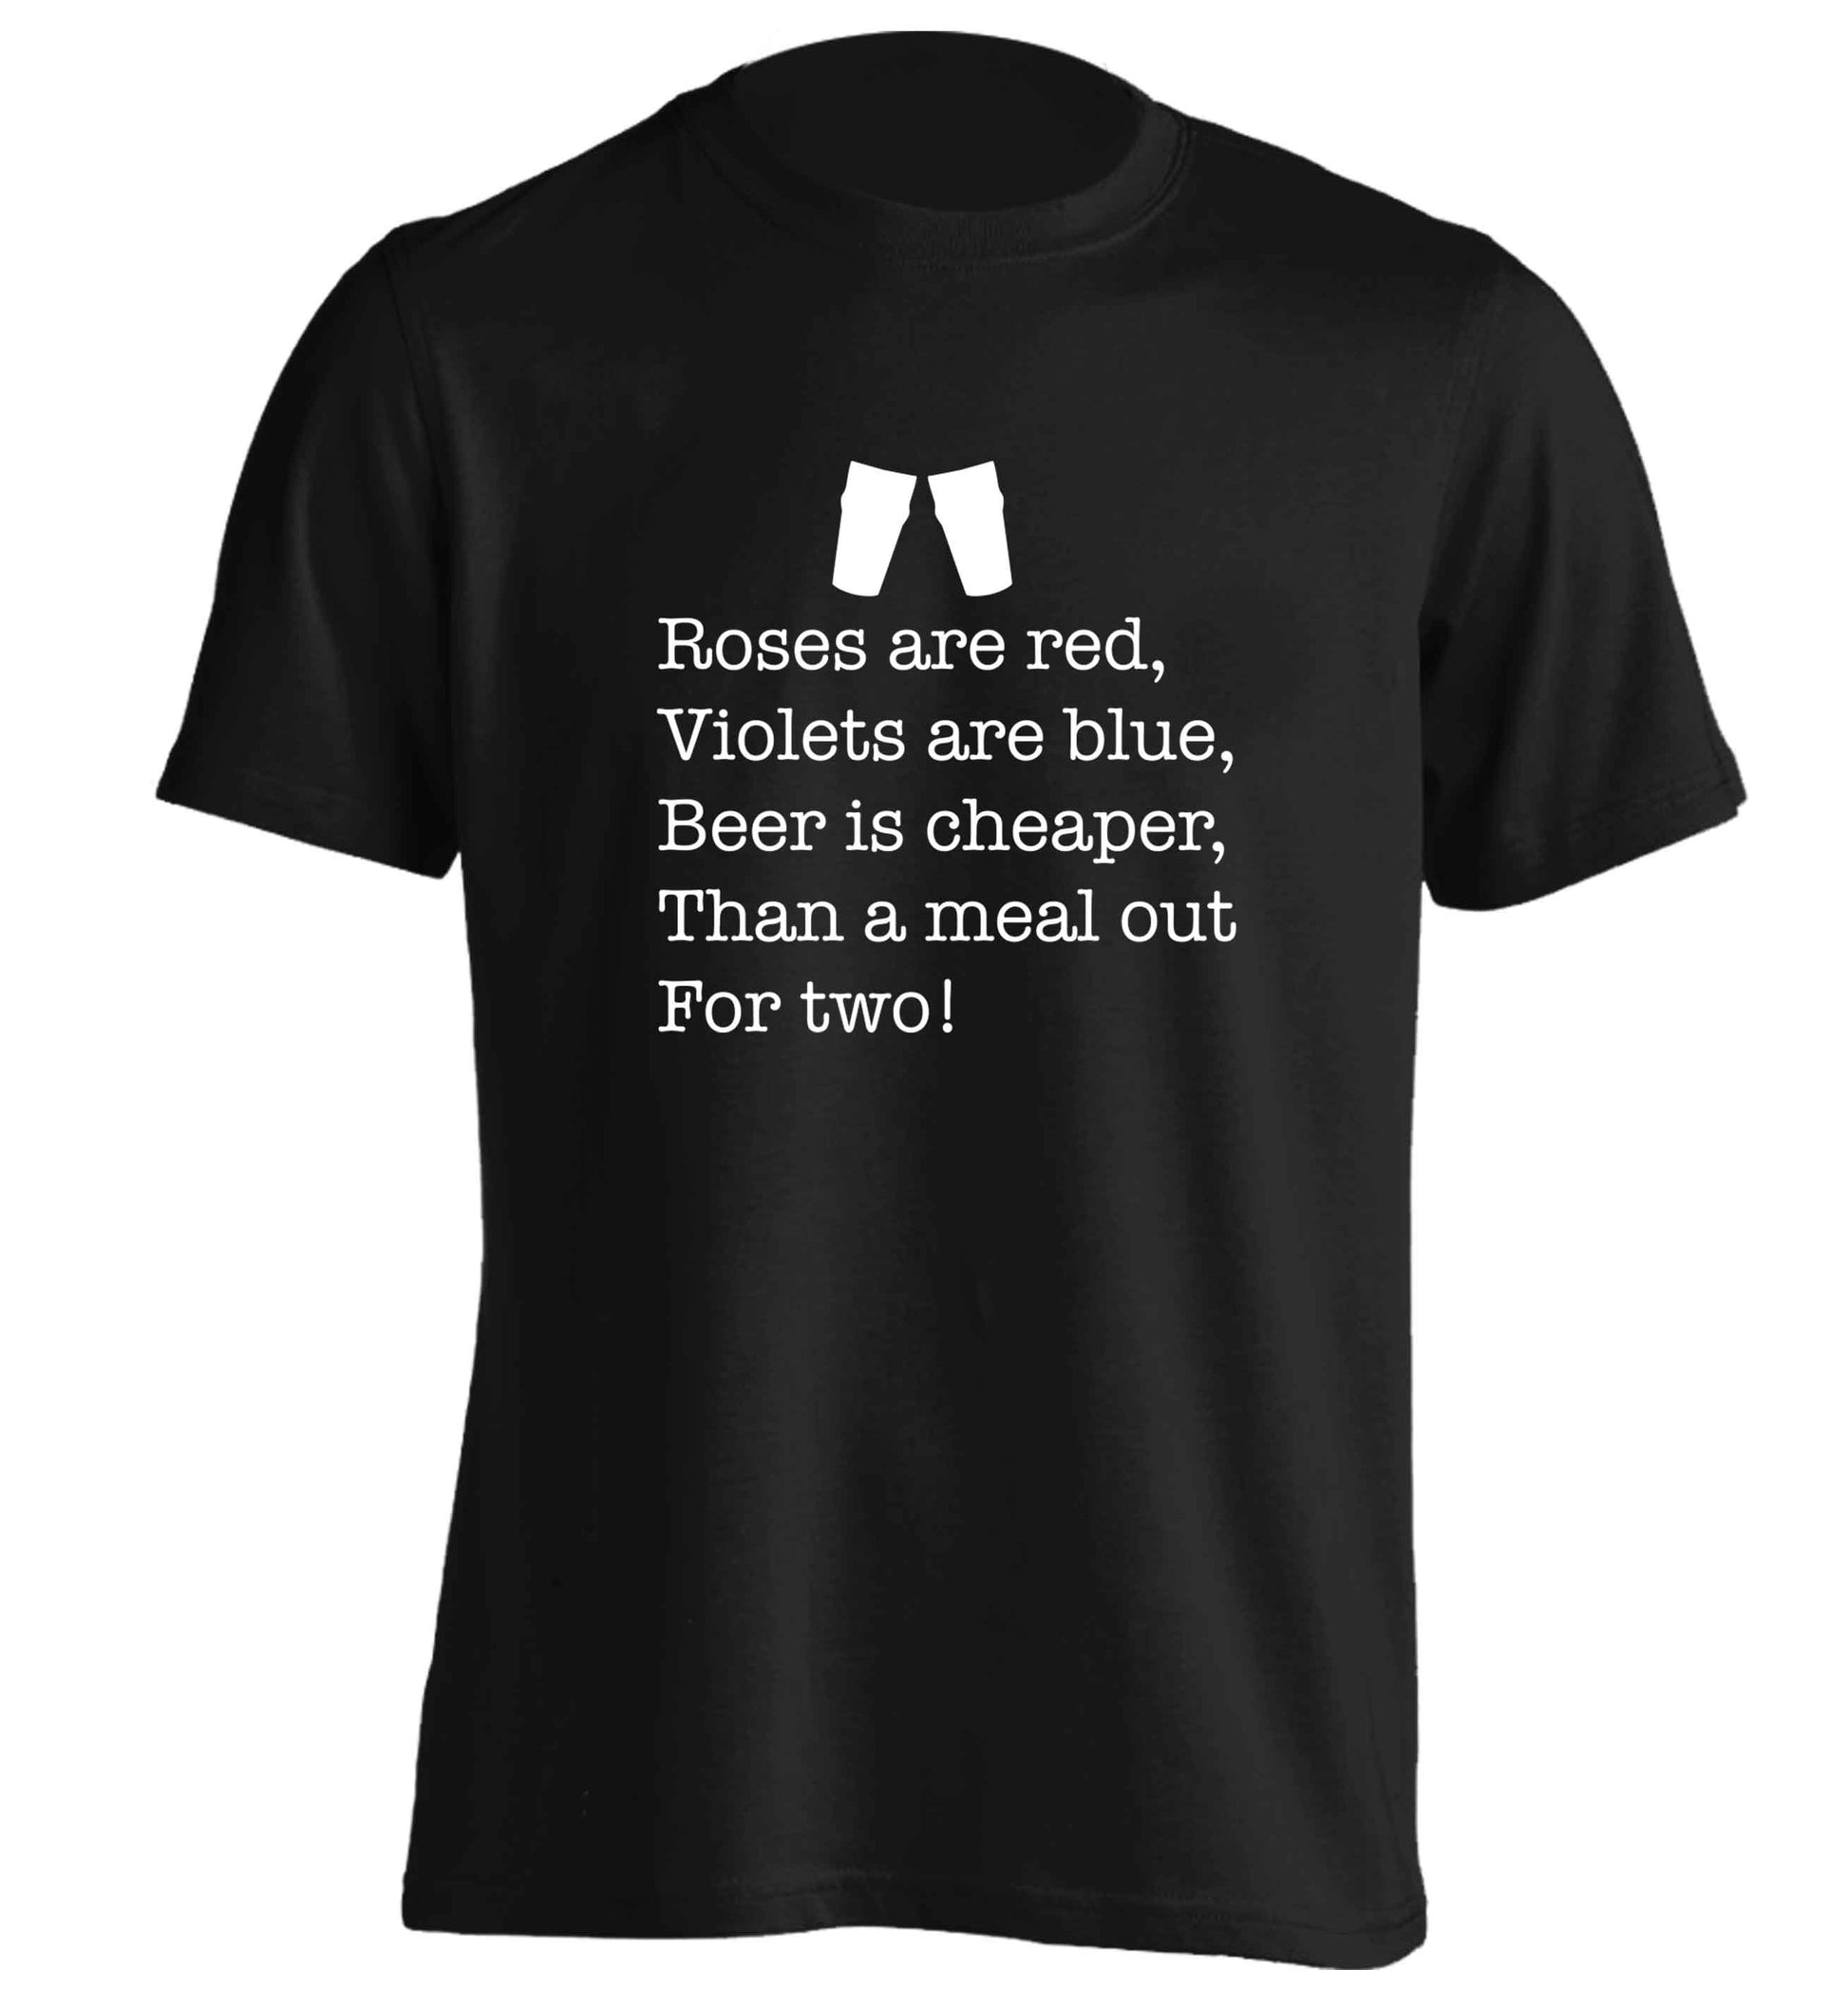 Roses are red violets are blue beer is cheaper than a meal out for two adults unisex black Tshirt 2XL